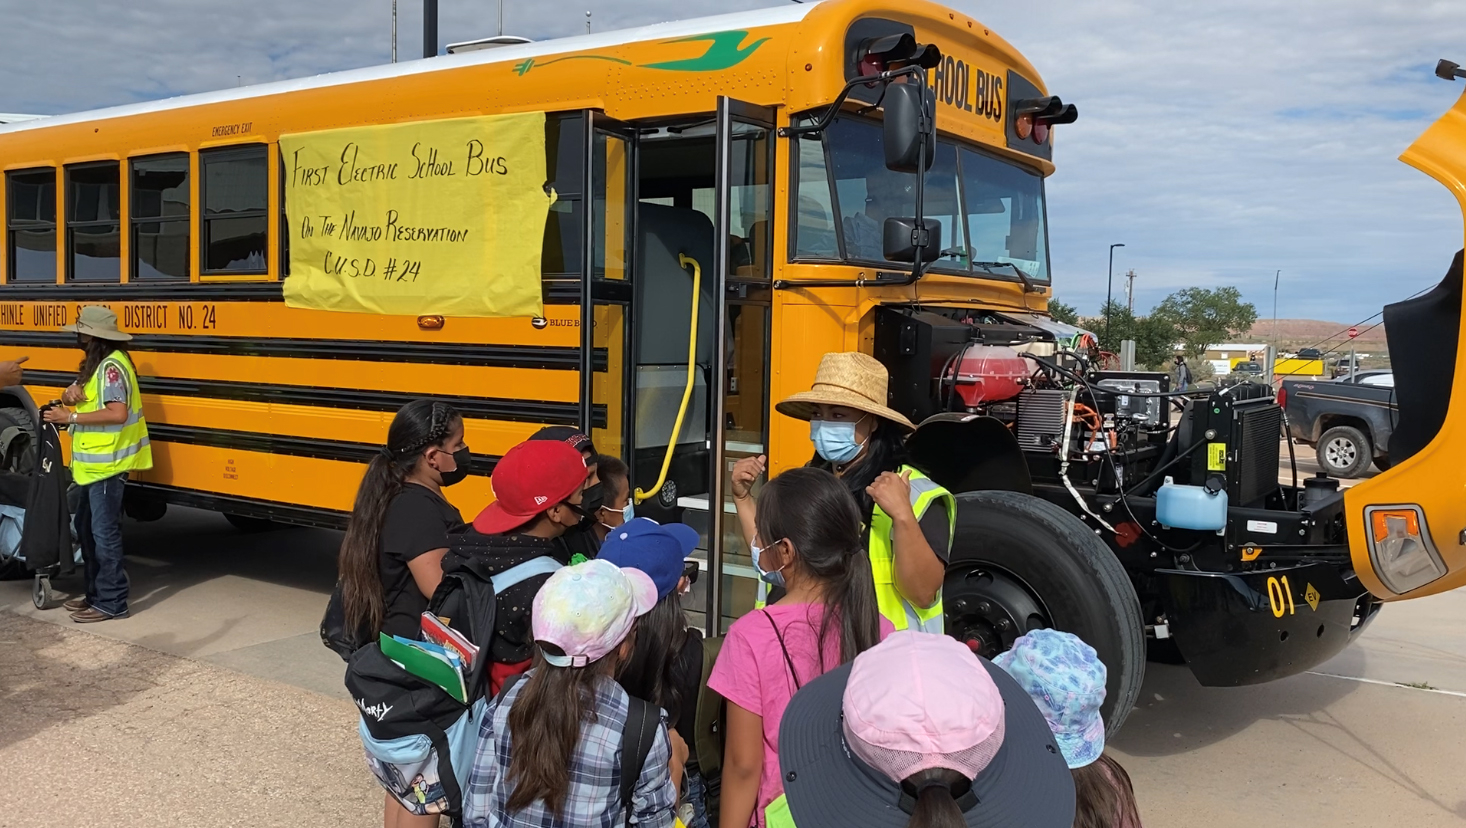 Chinle Unified School District receives first electric school bus